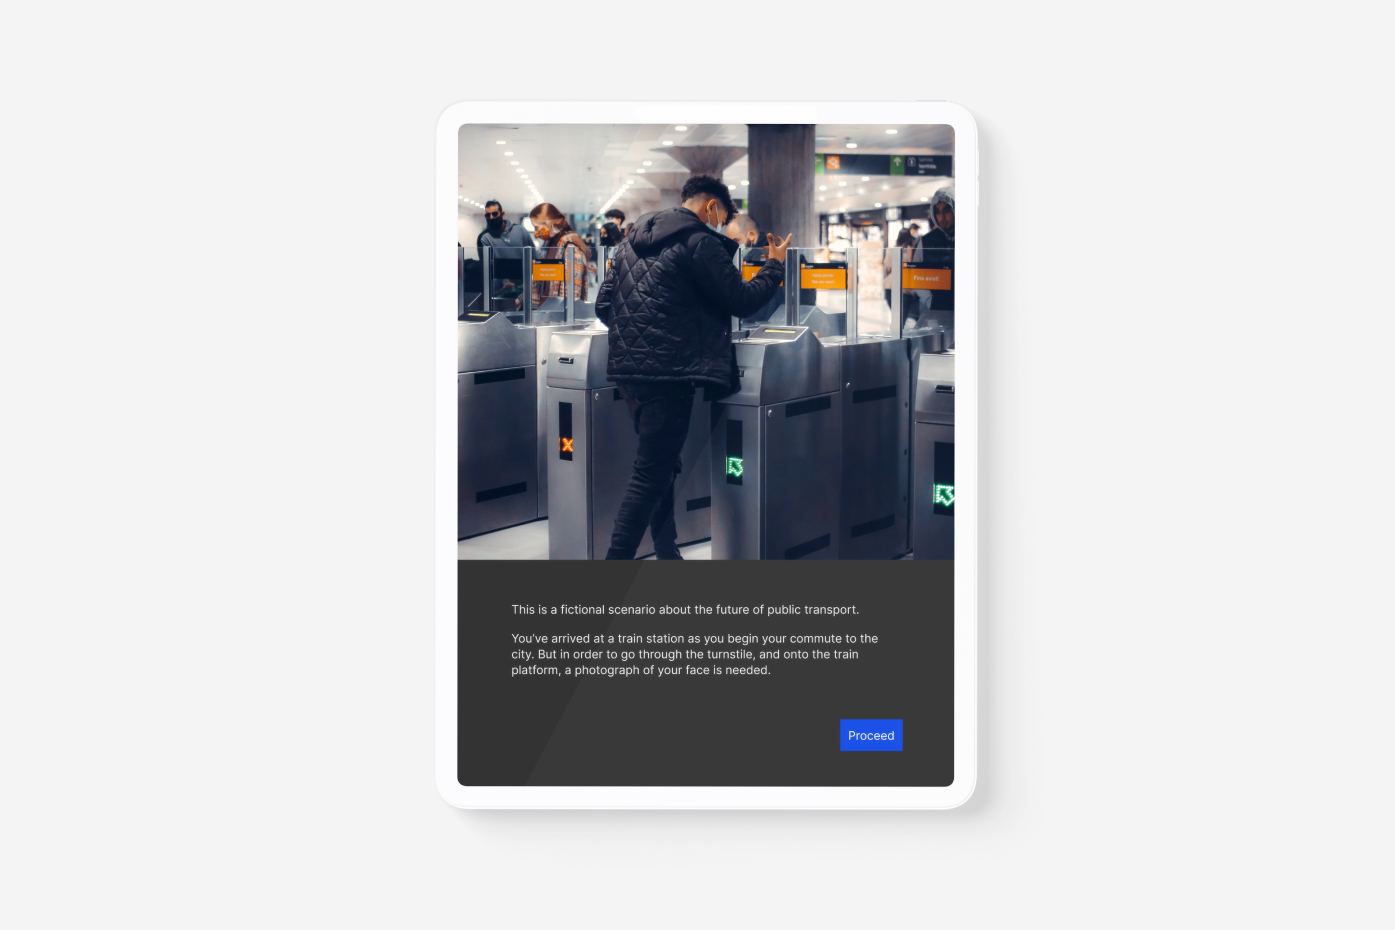 An image of the Face Value application's scenario screen. The image shows a person entering the public transport network via a turnstile. The text underneath the image explains that the scenario will explore a potential future of public transportation.